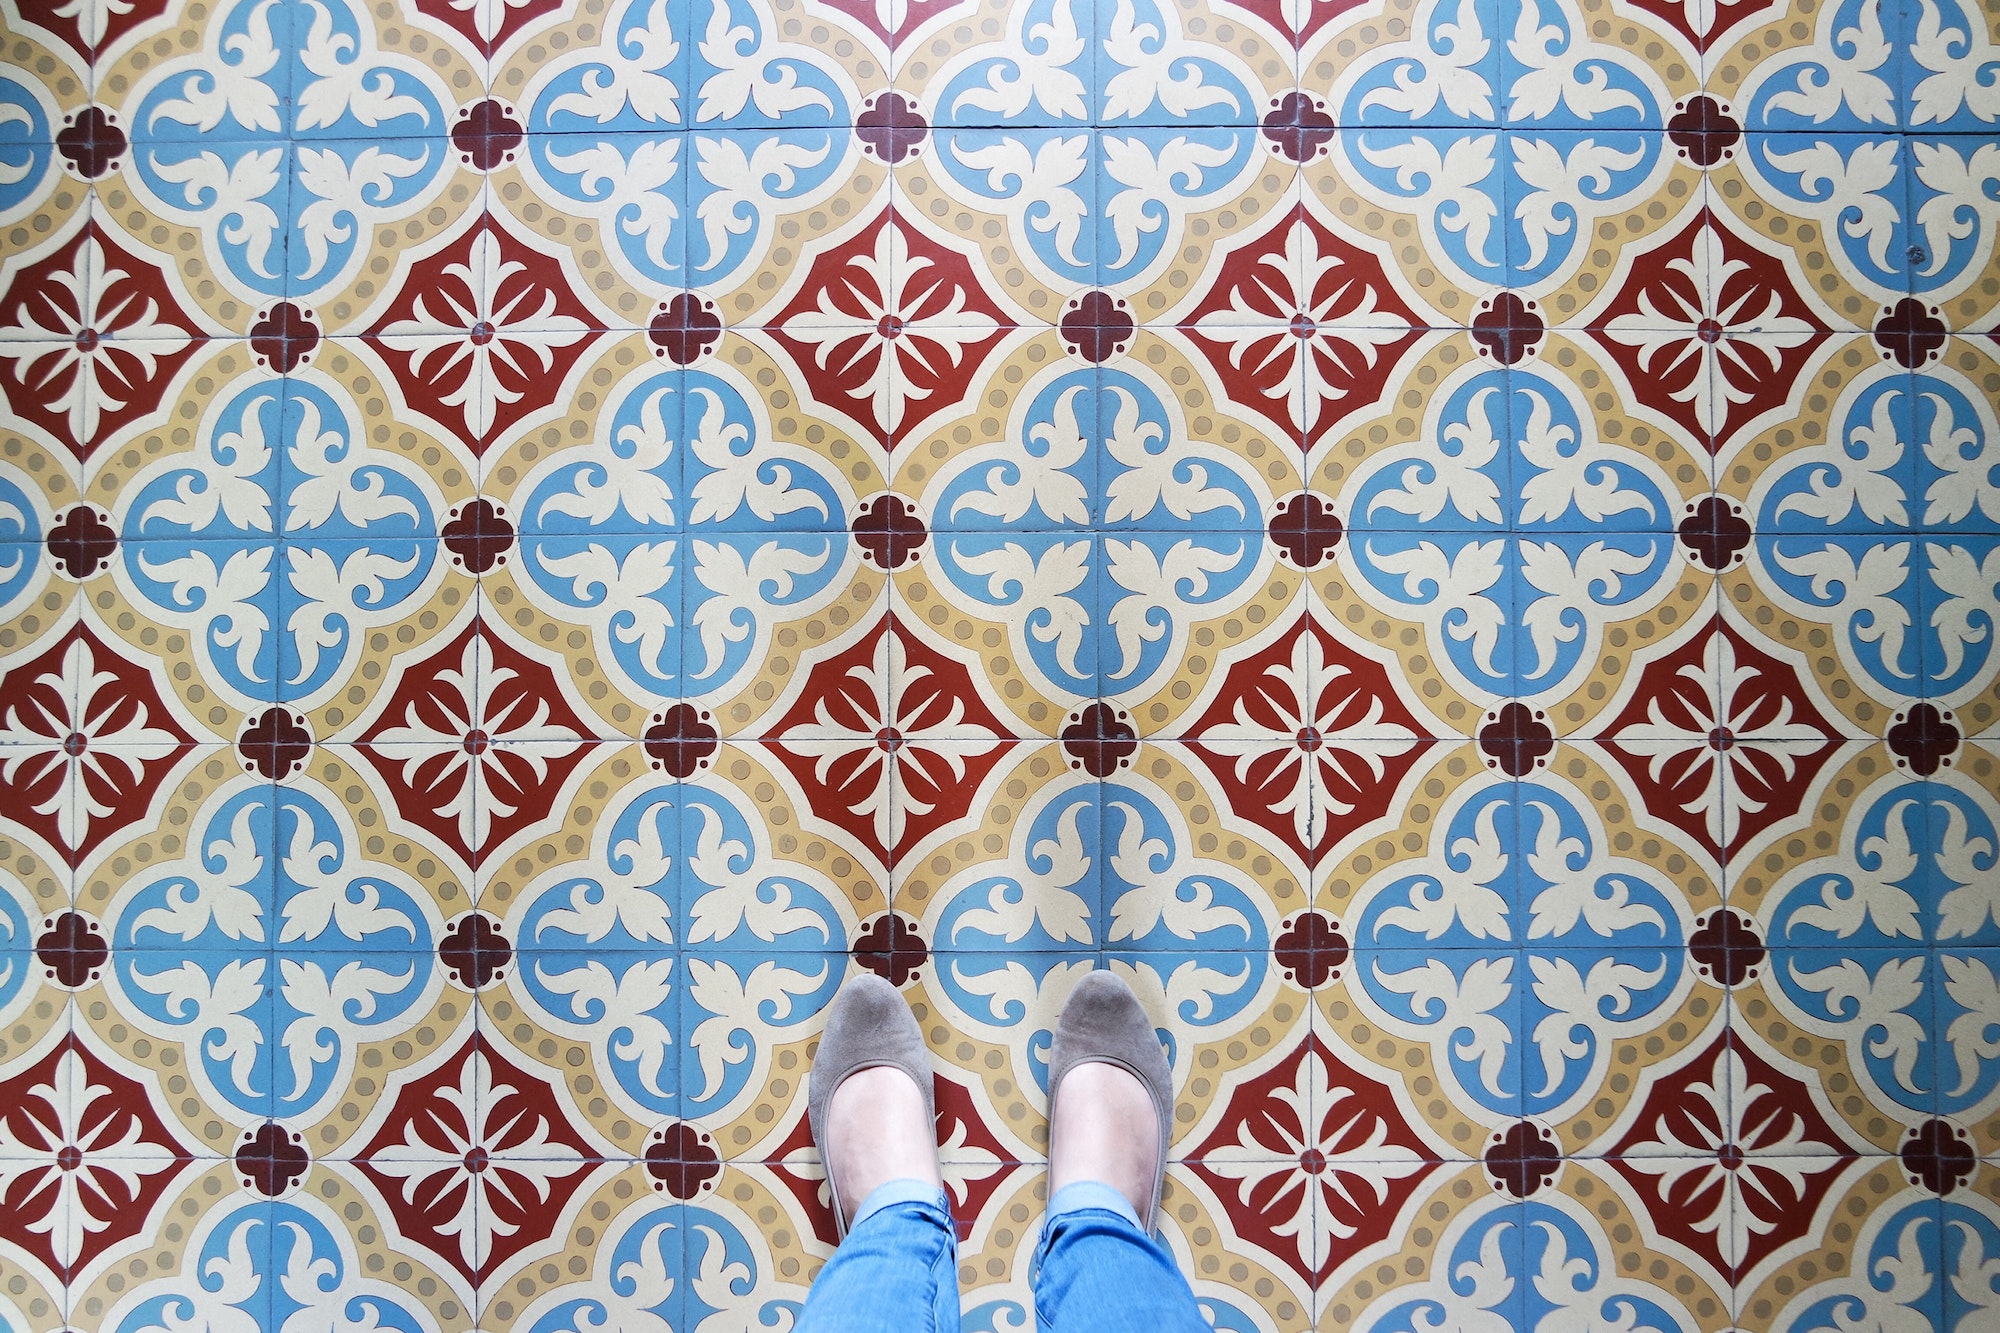 Standing on the decorative tiled floor, view from above.